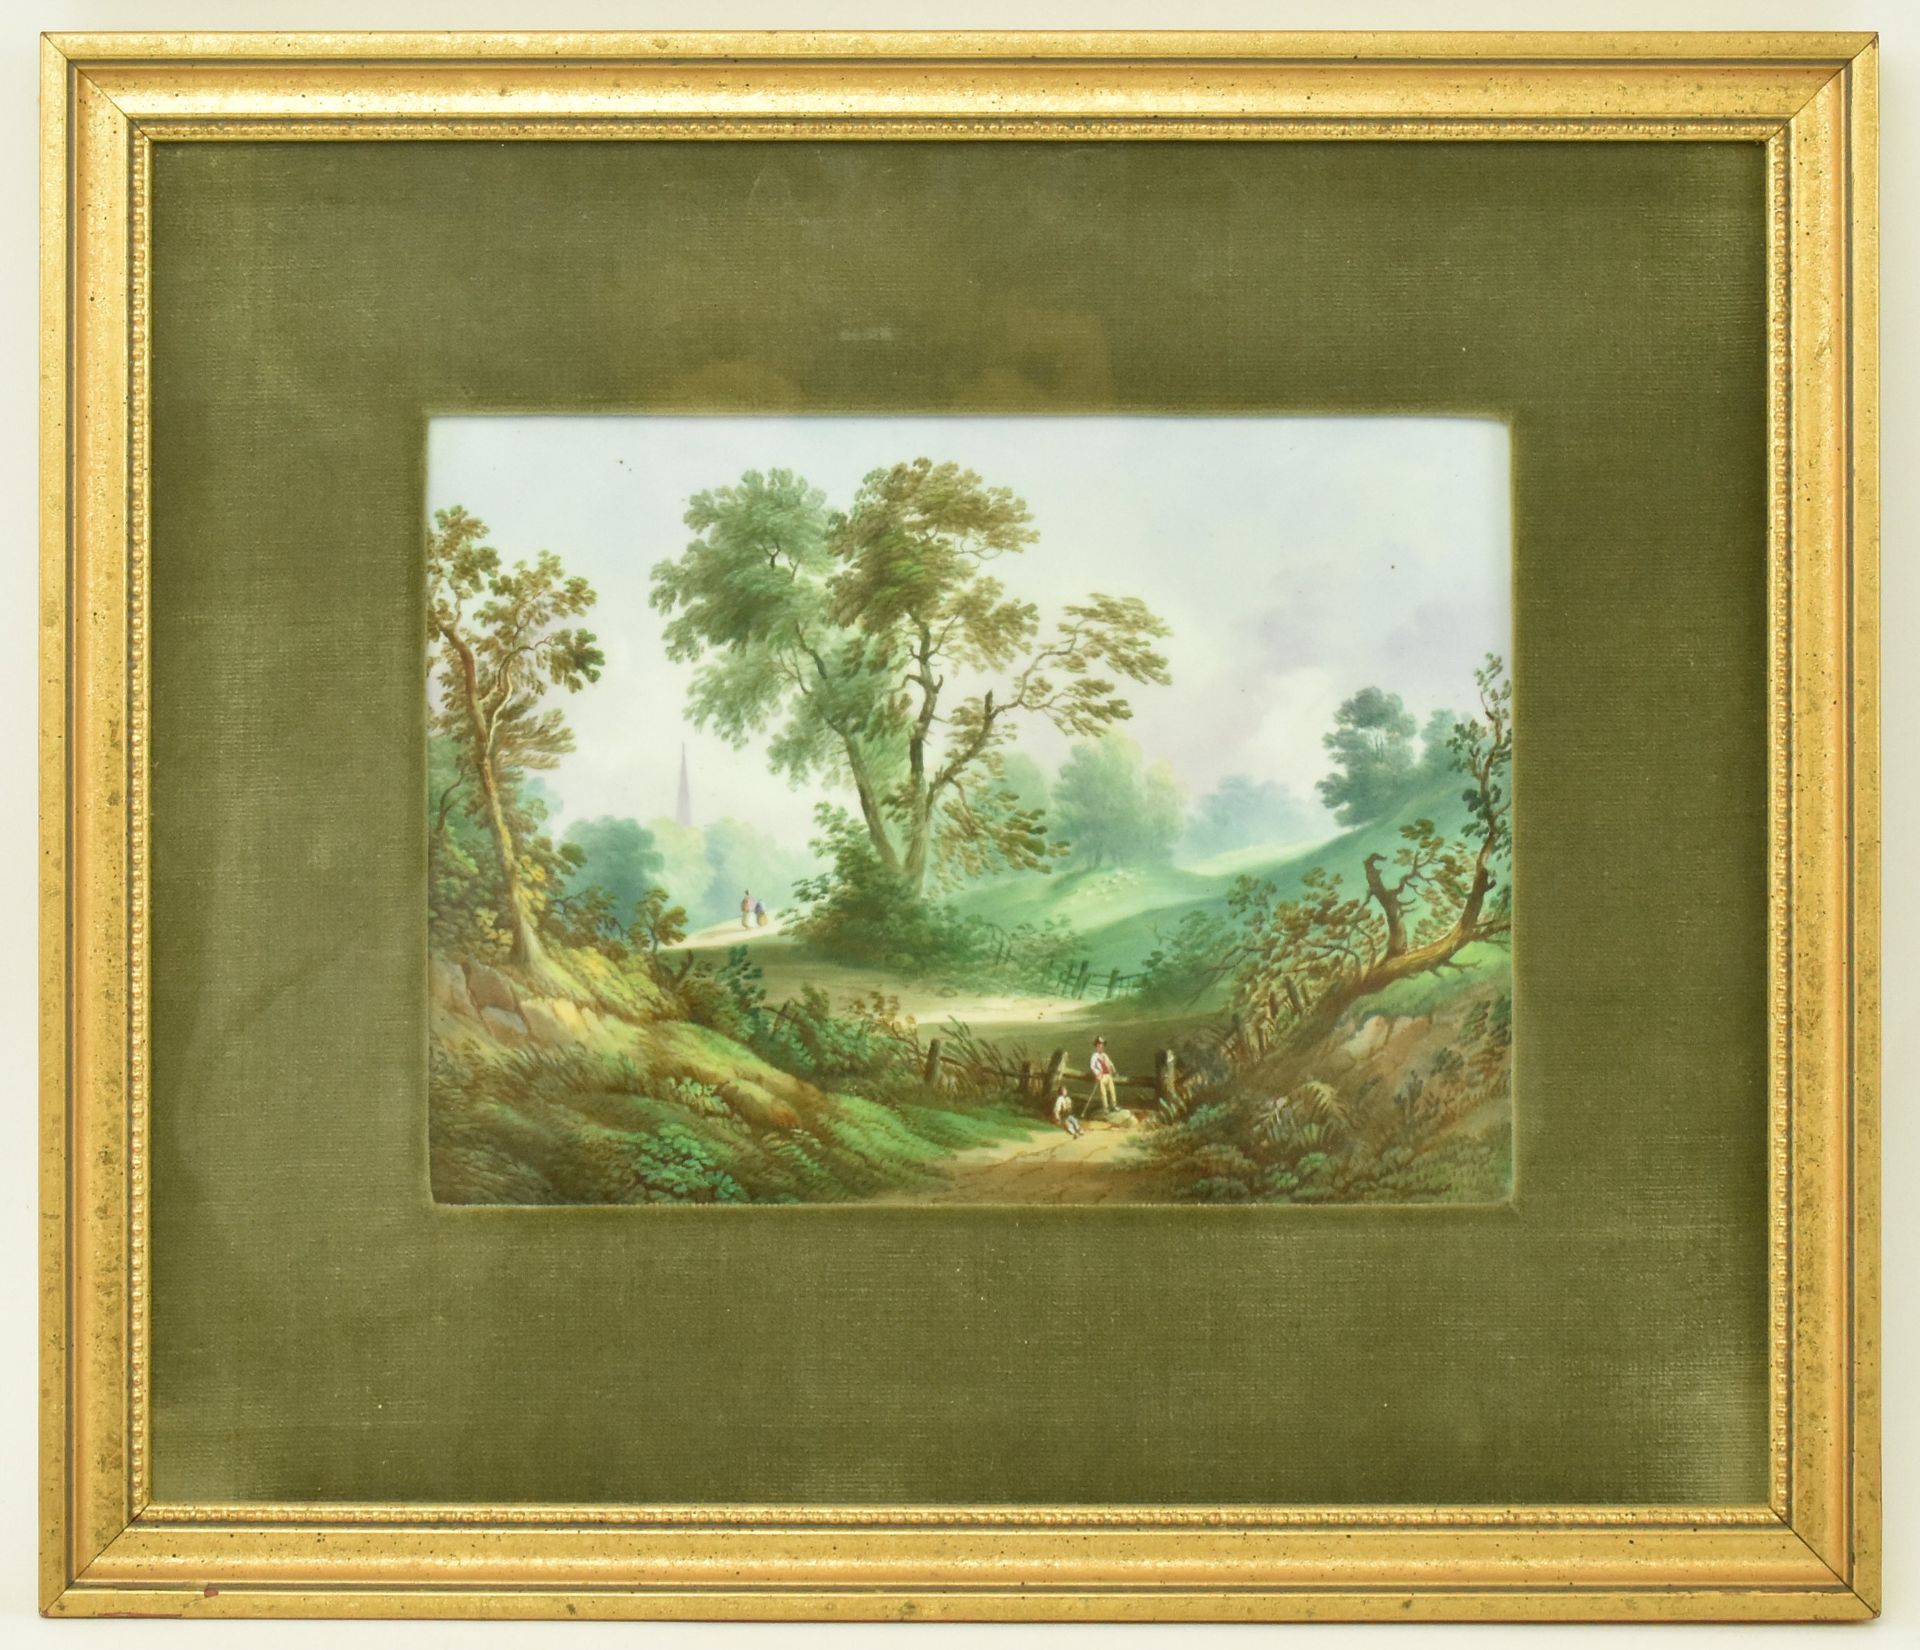 EARLY 19TH CENTURY FRAMED PORCELAIN PLAQUE OF FOREST SCENE - Image 2 of 4